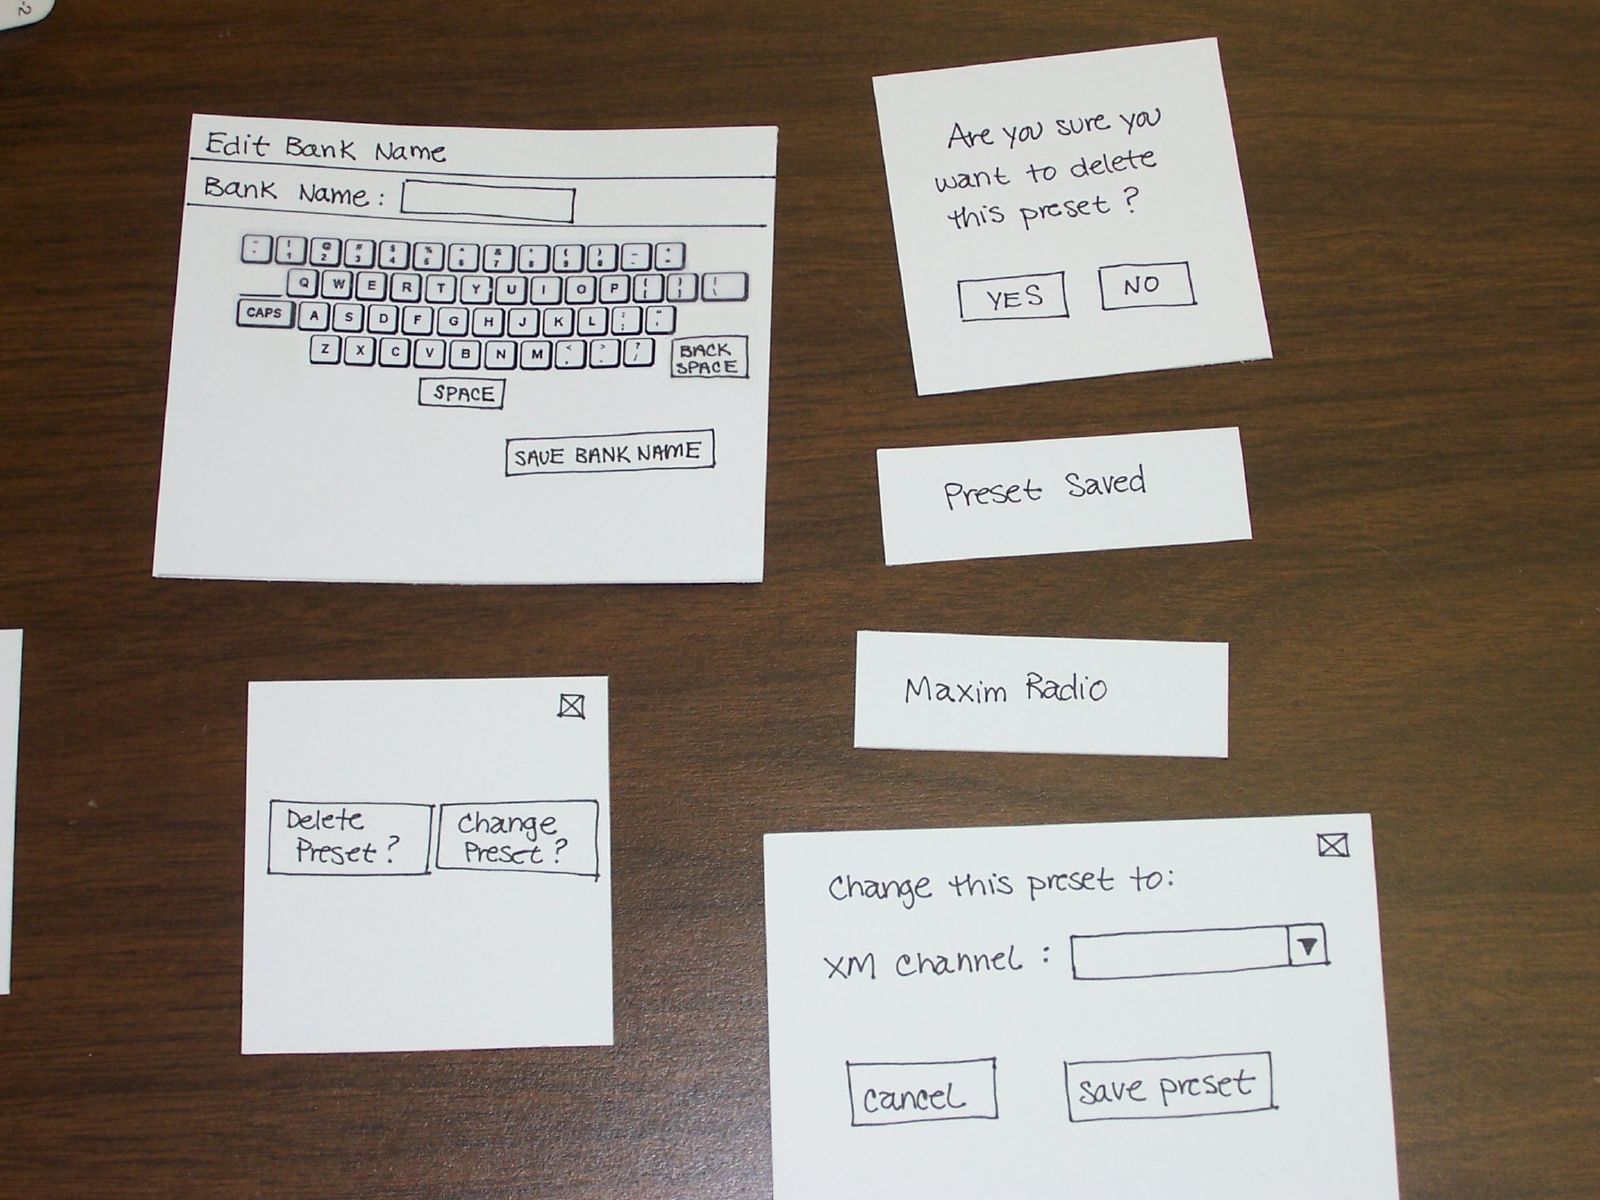 Paper prototype of qwerty keyboard and dialog boxes